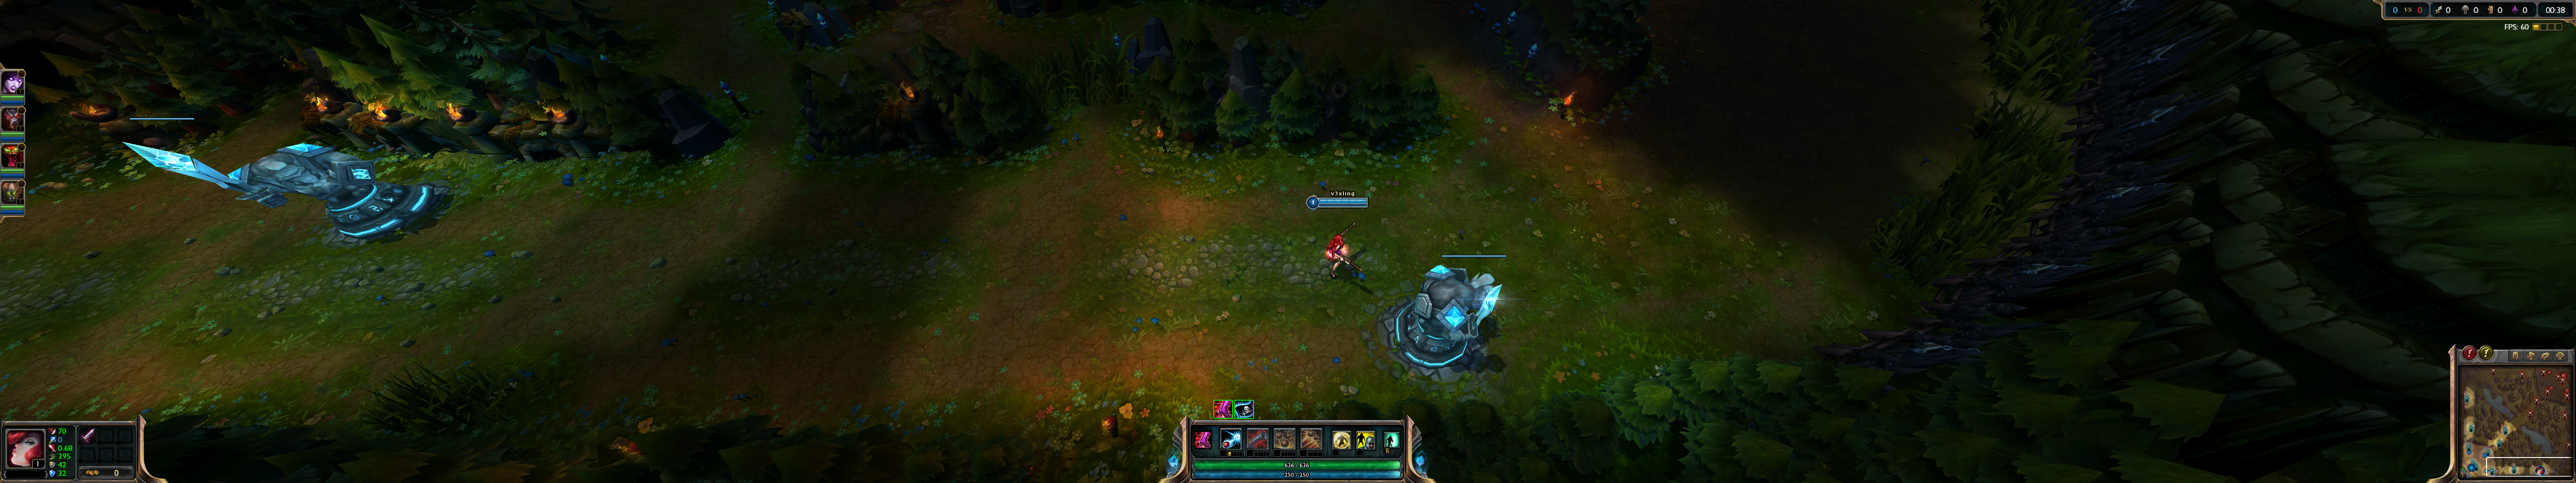 Screenshot from Leauge of Legends on 3 screens before the fix